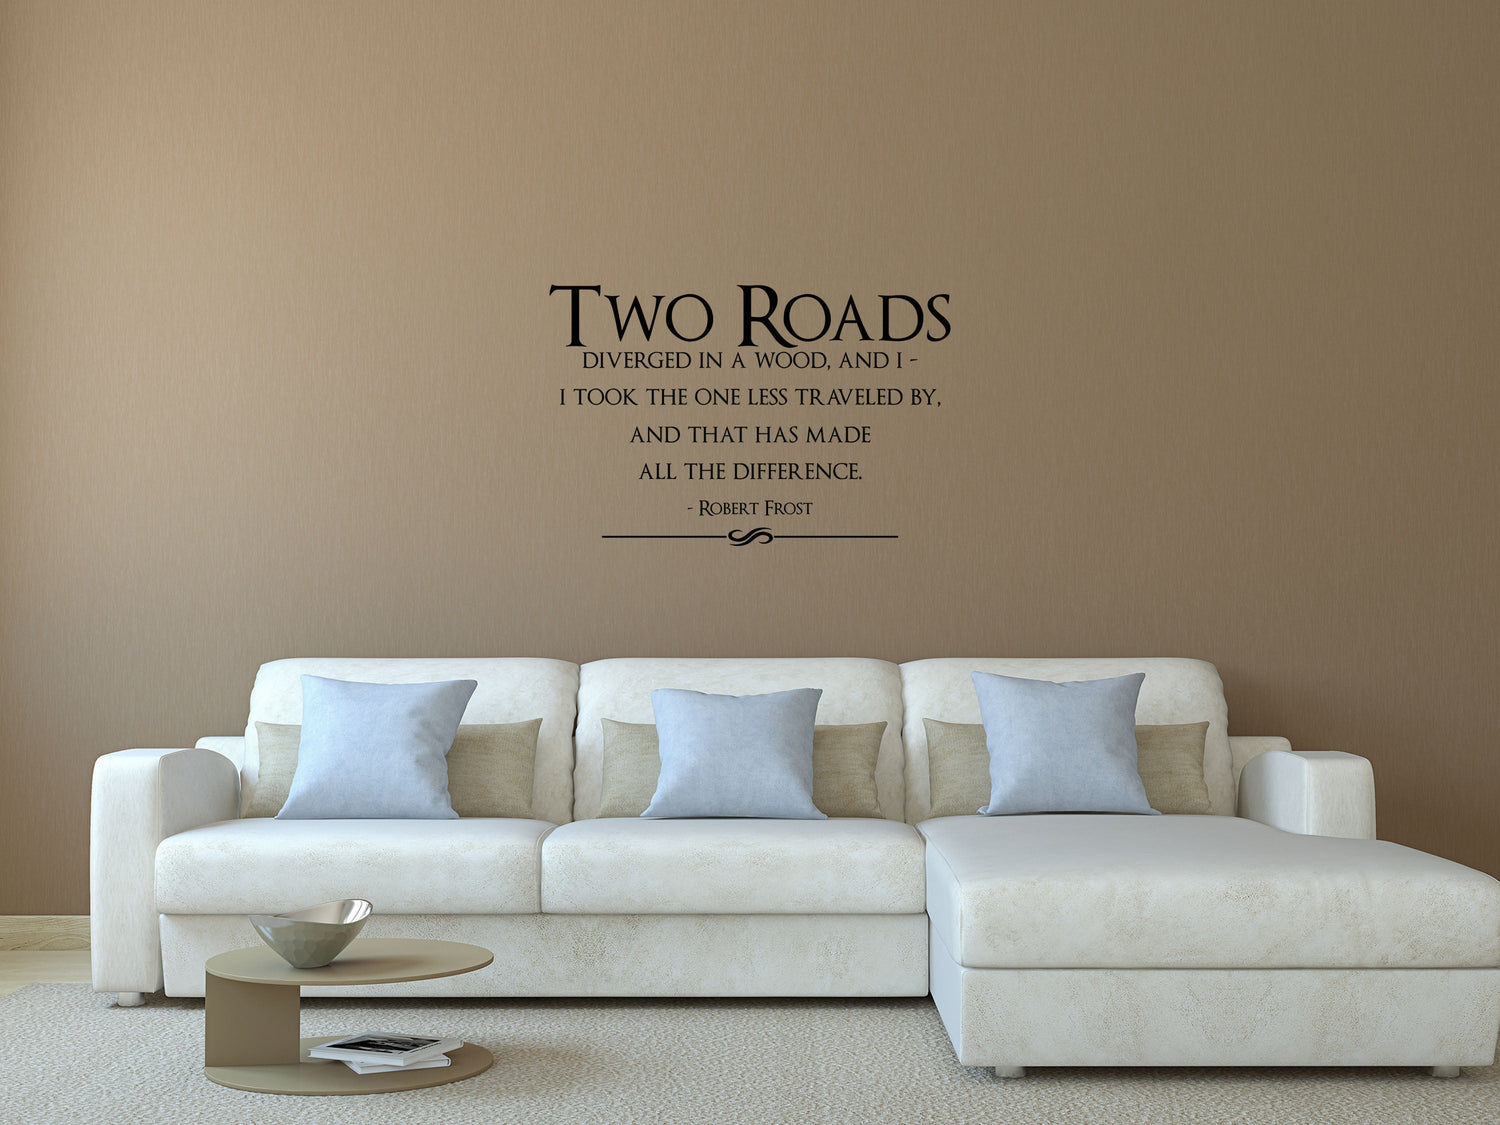 Two Roads Less Traveled - Inspirational Wall Signs Vinyl Wall Decal Inspirational Wall Signs 